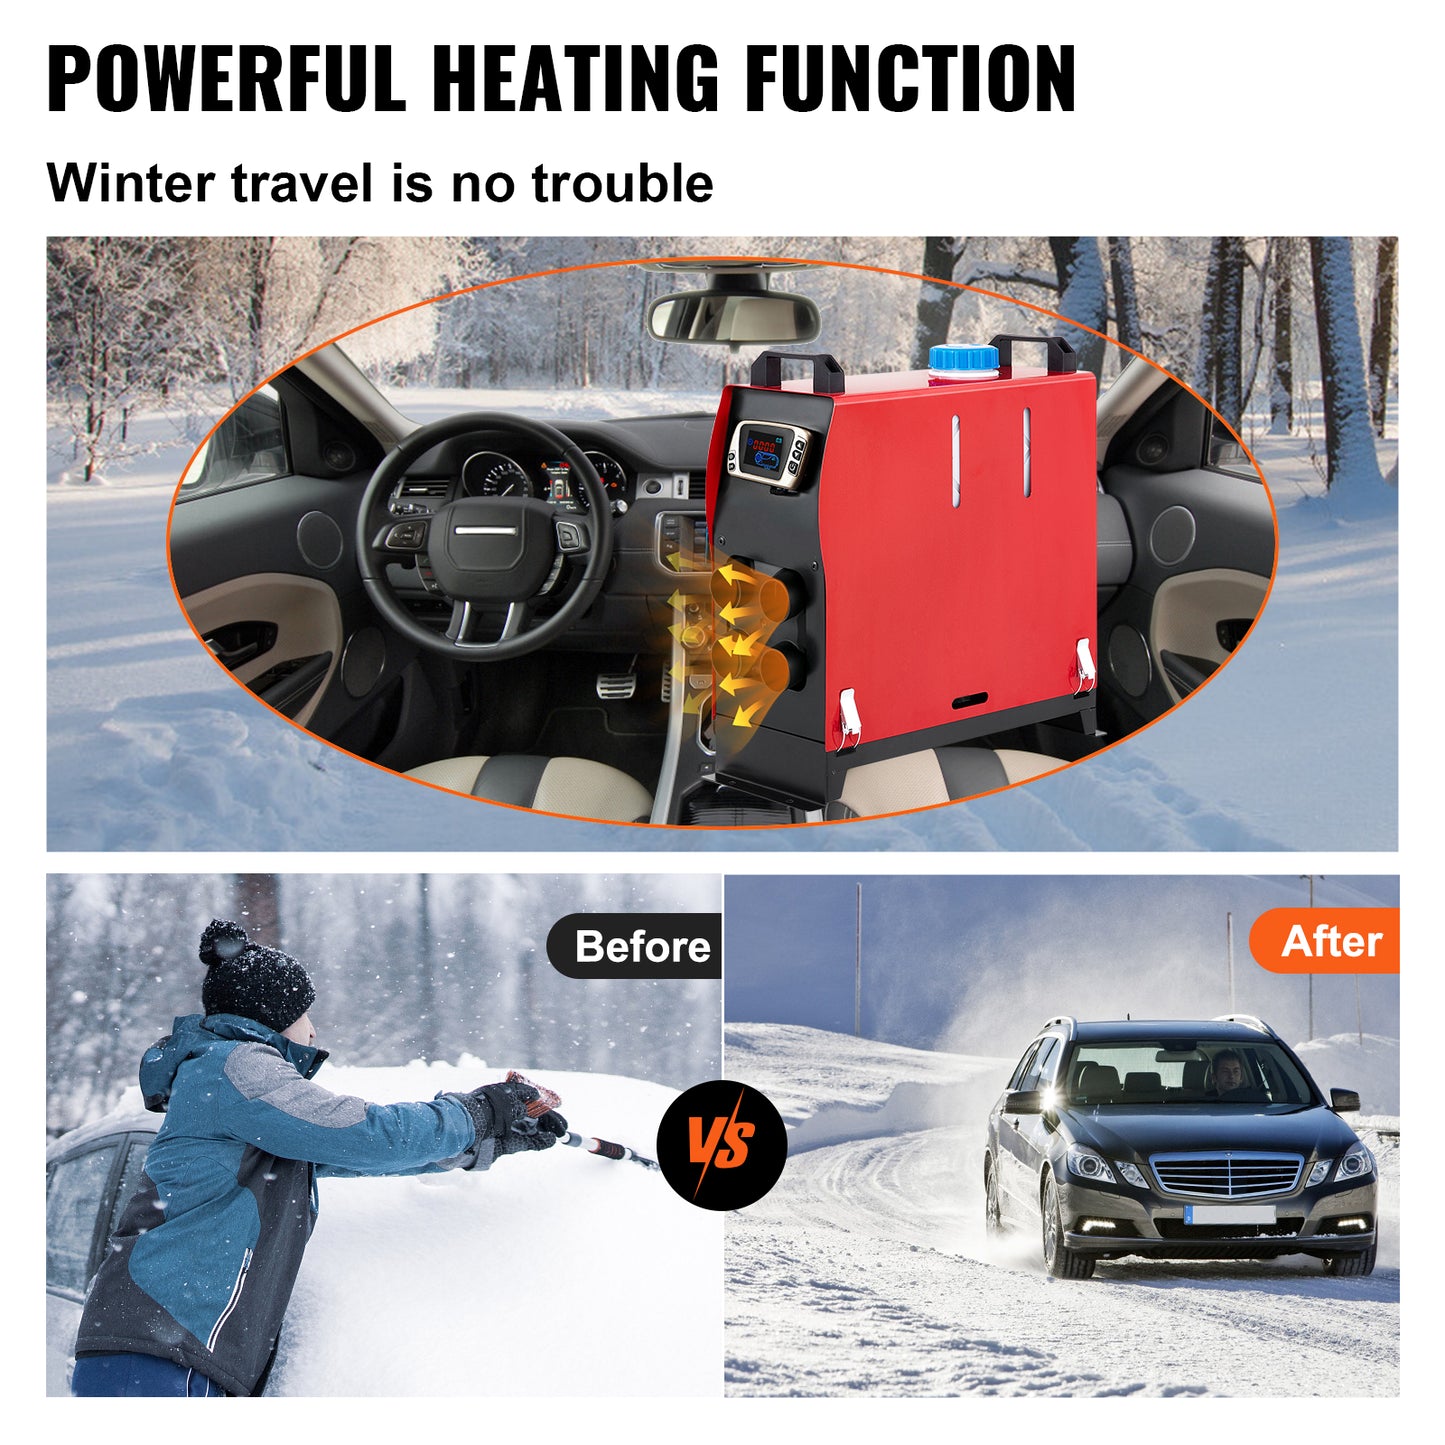 Diesel Air Heater Plateau for Heating & Fans - Car Electrical Appliances with LCD Switch - 12V, 2.5-8KW.